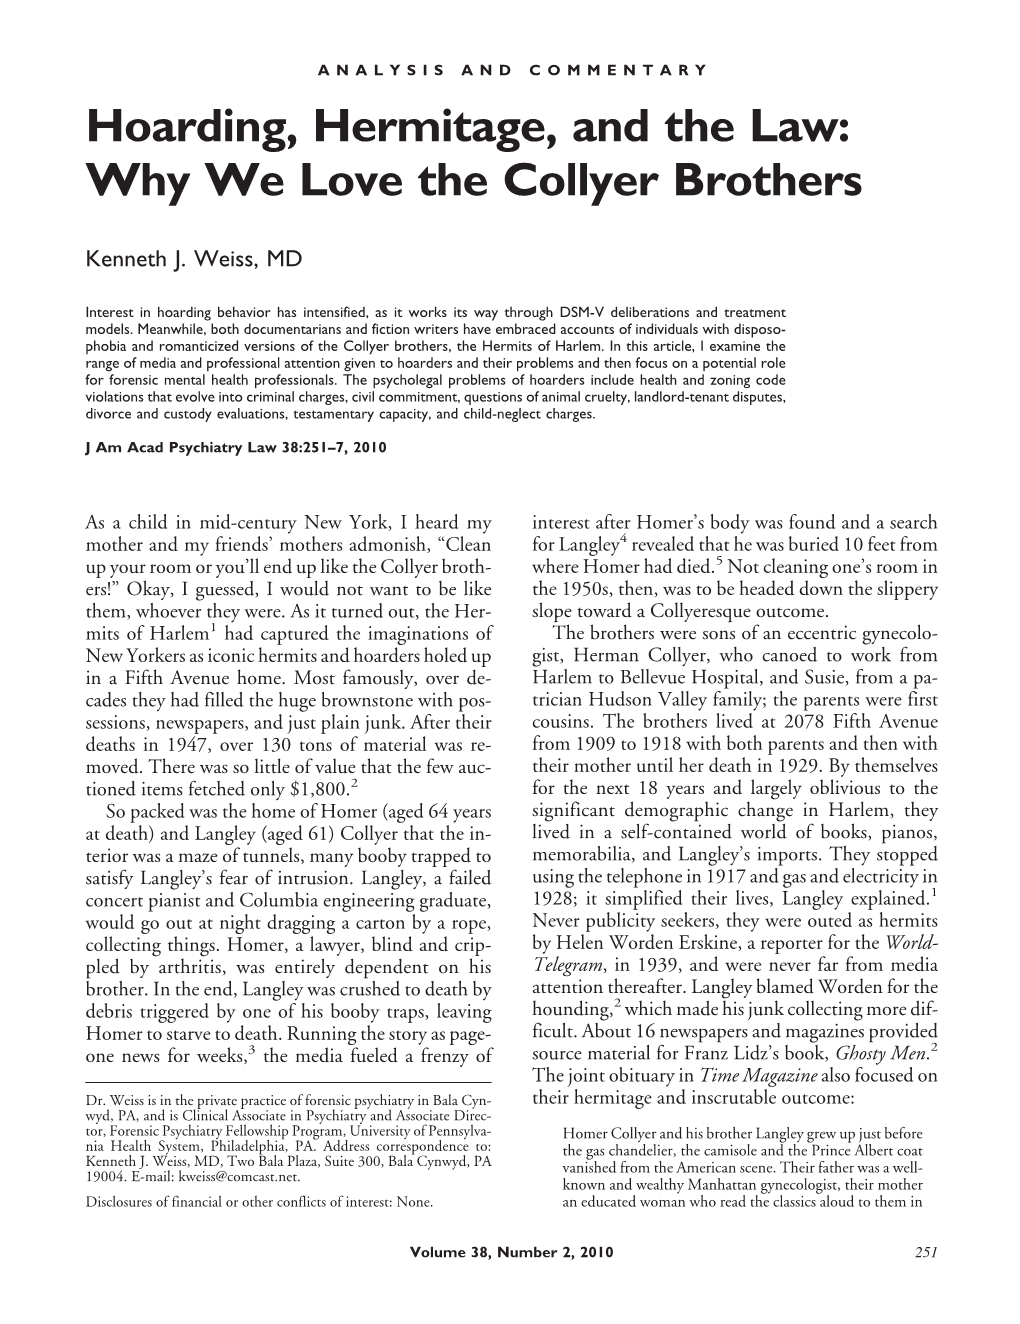 Hoarding, Hermitage, and the Law: Why We Love the Collyer Brothers